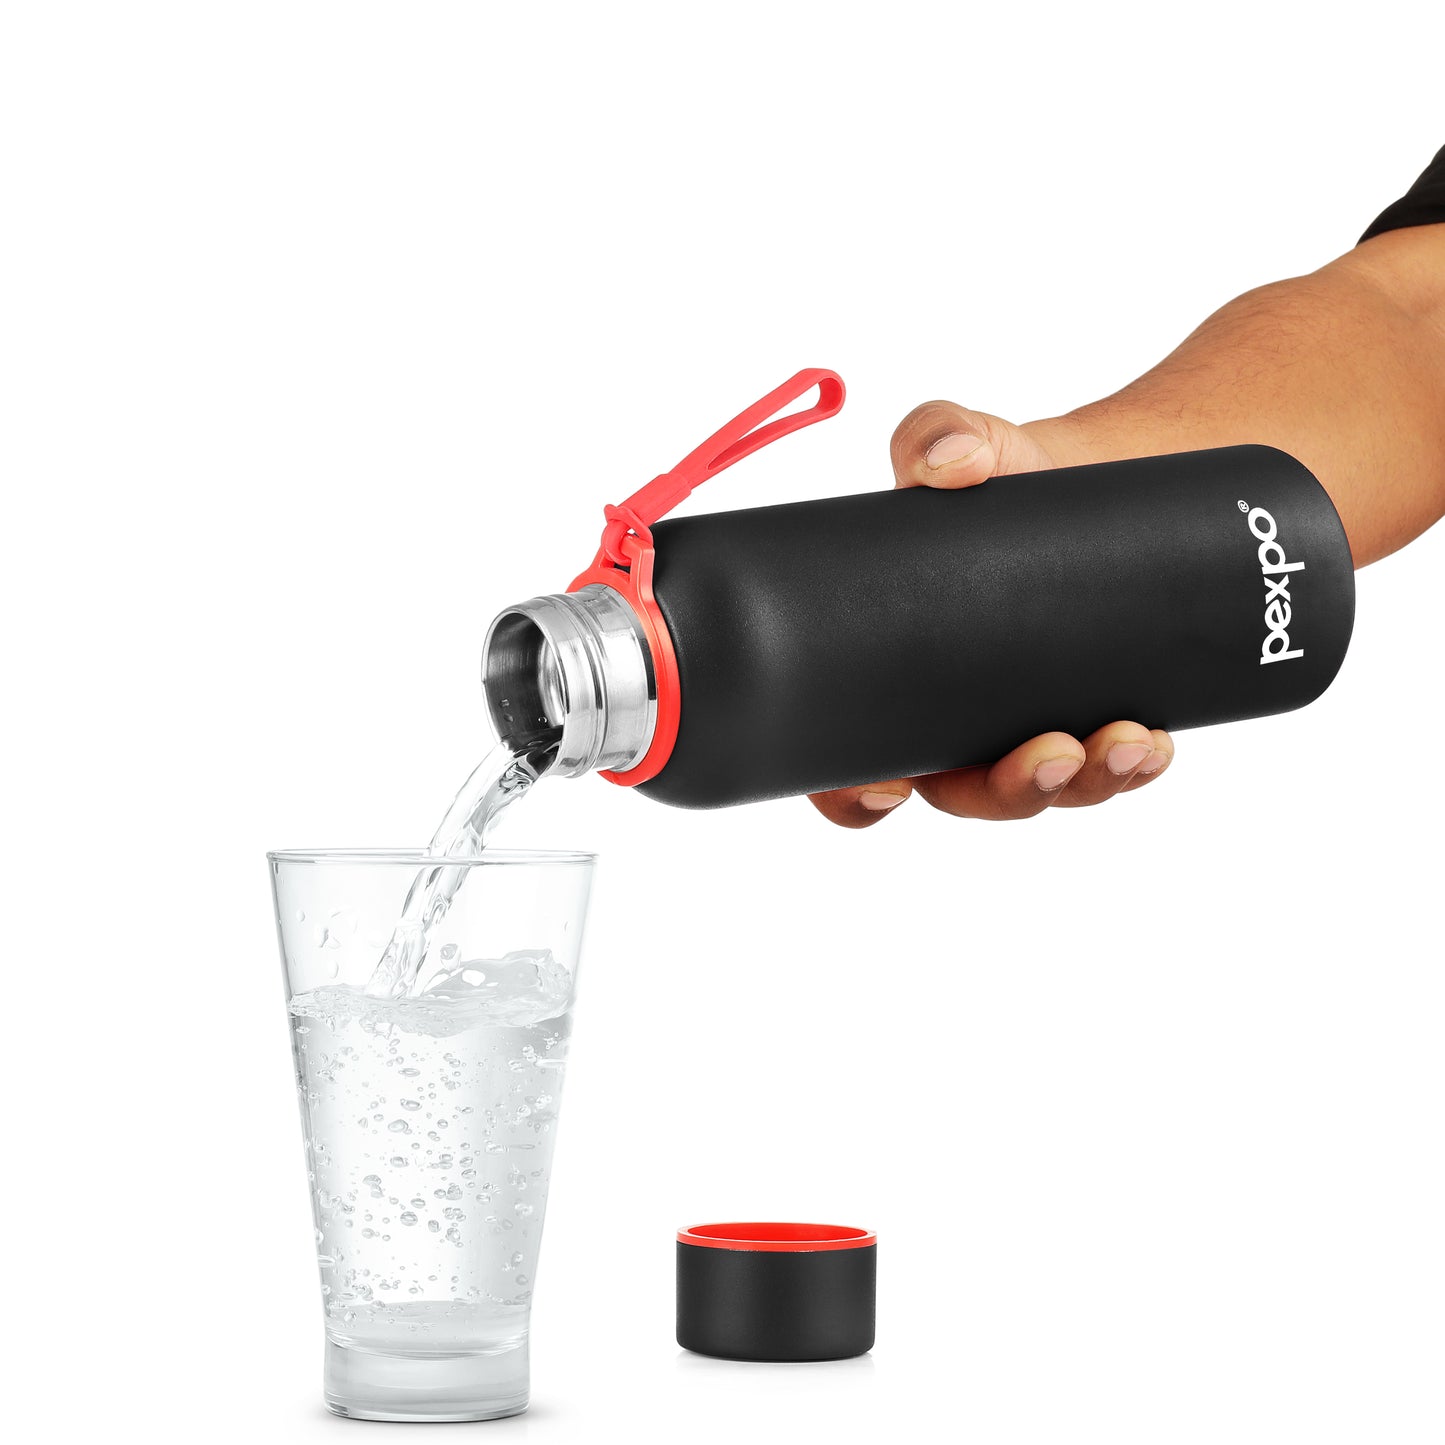 Bravo - Vacuum Insulated Stainless Steel Bottle With 3x Powder Coating